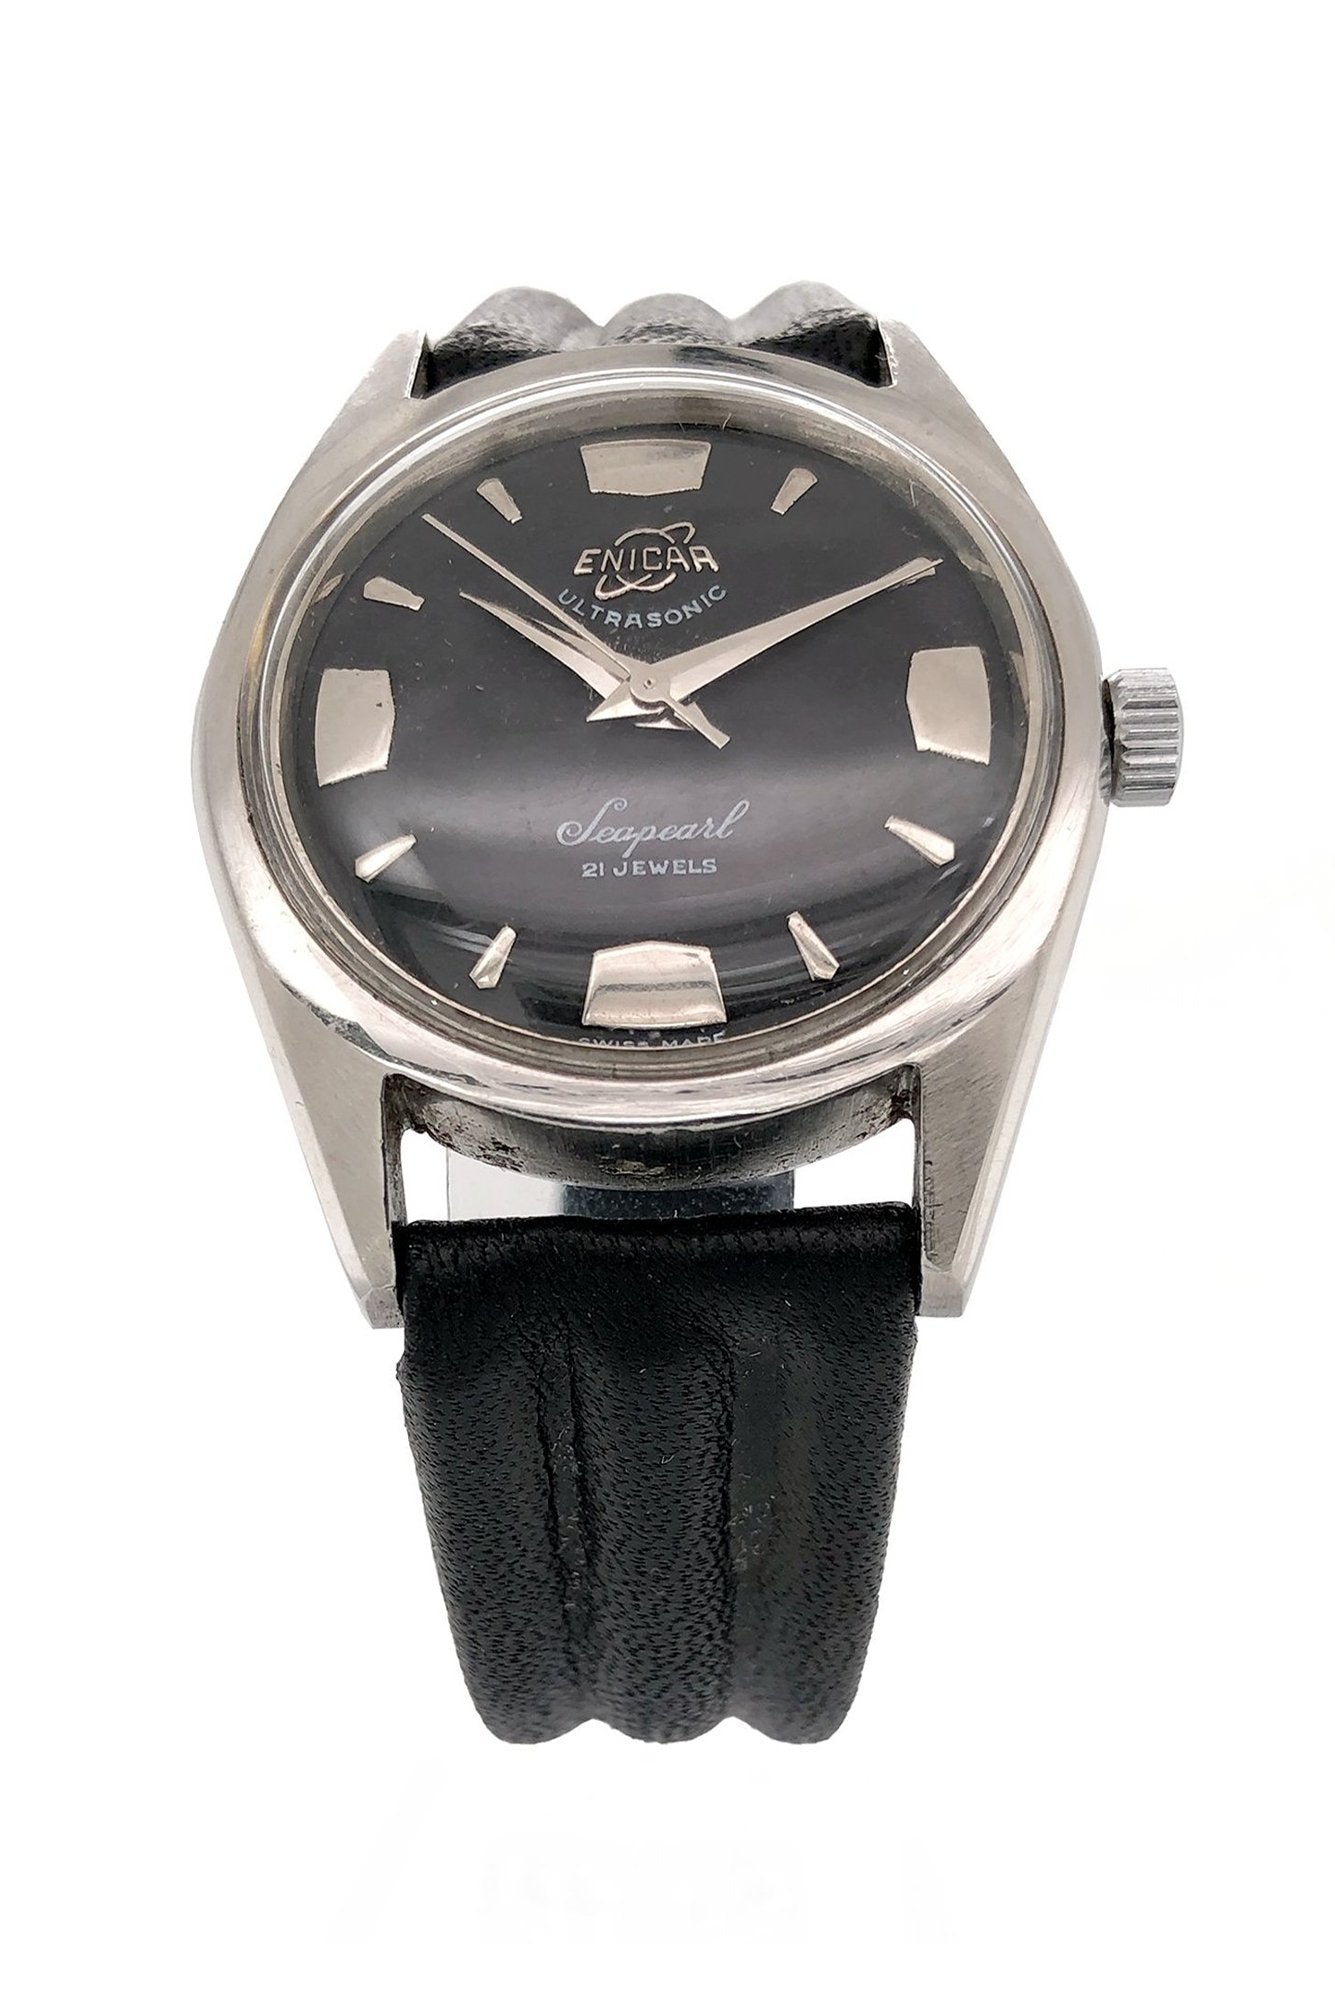 Enicar Seapearl Ultrasonic - Counting Time Watch Purveyors